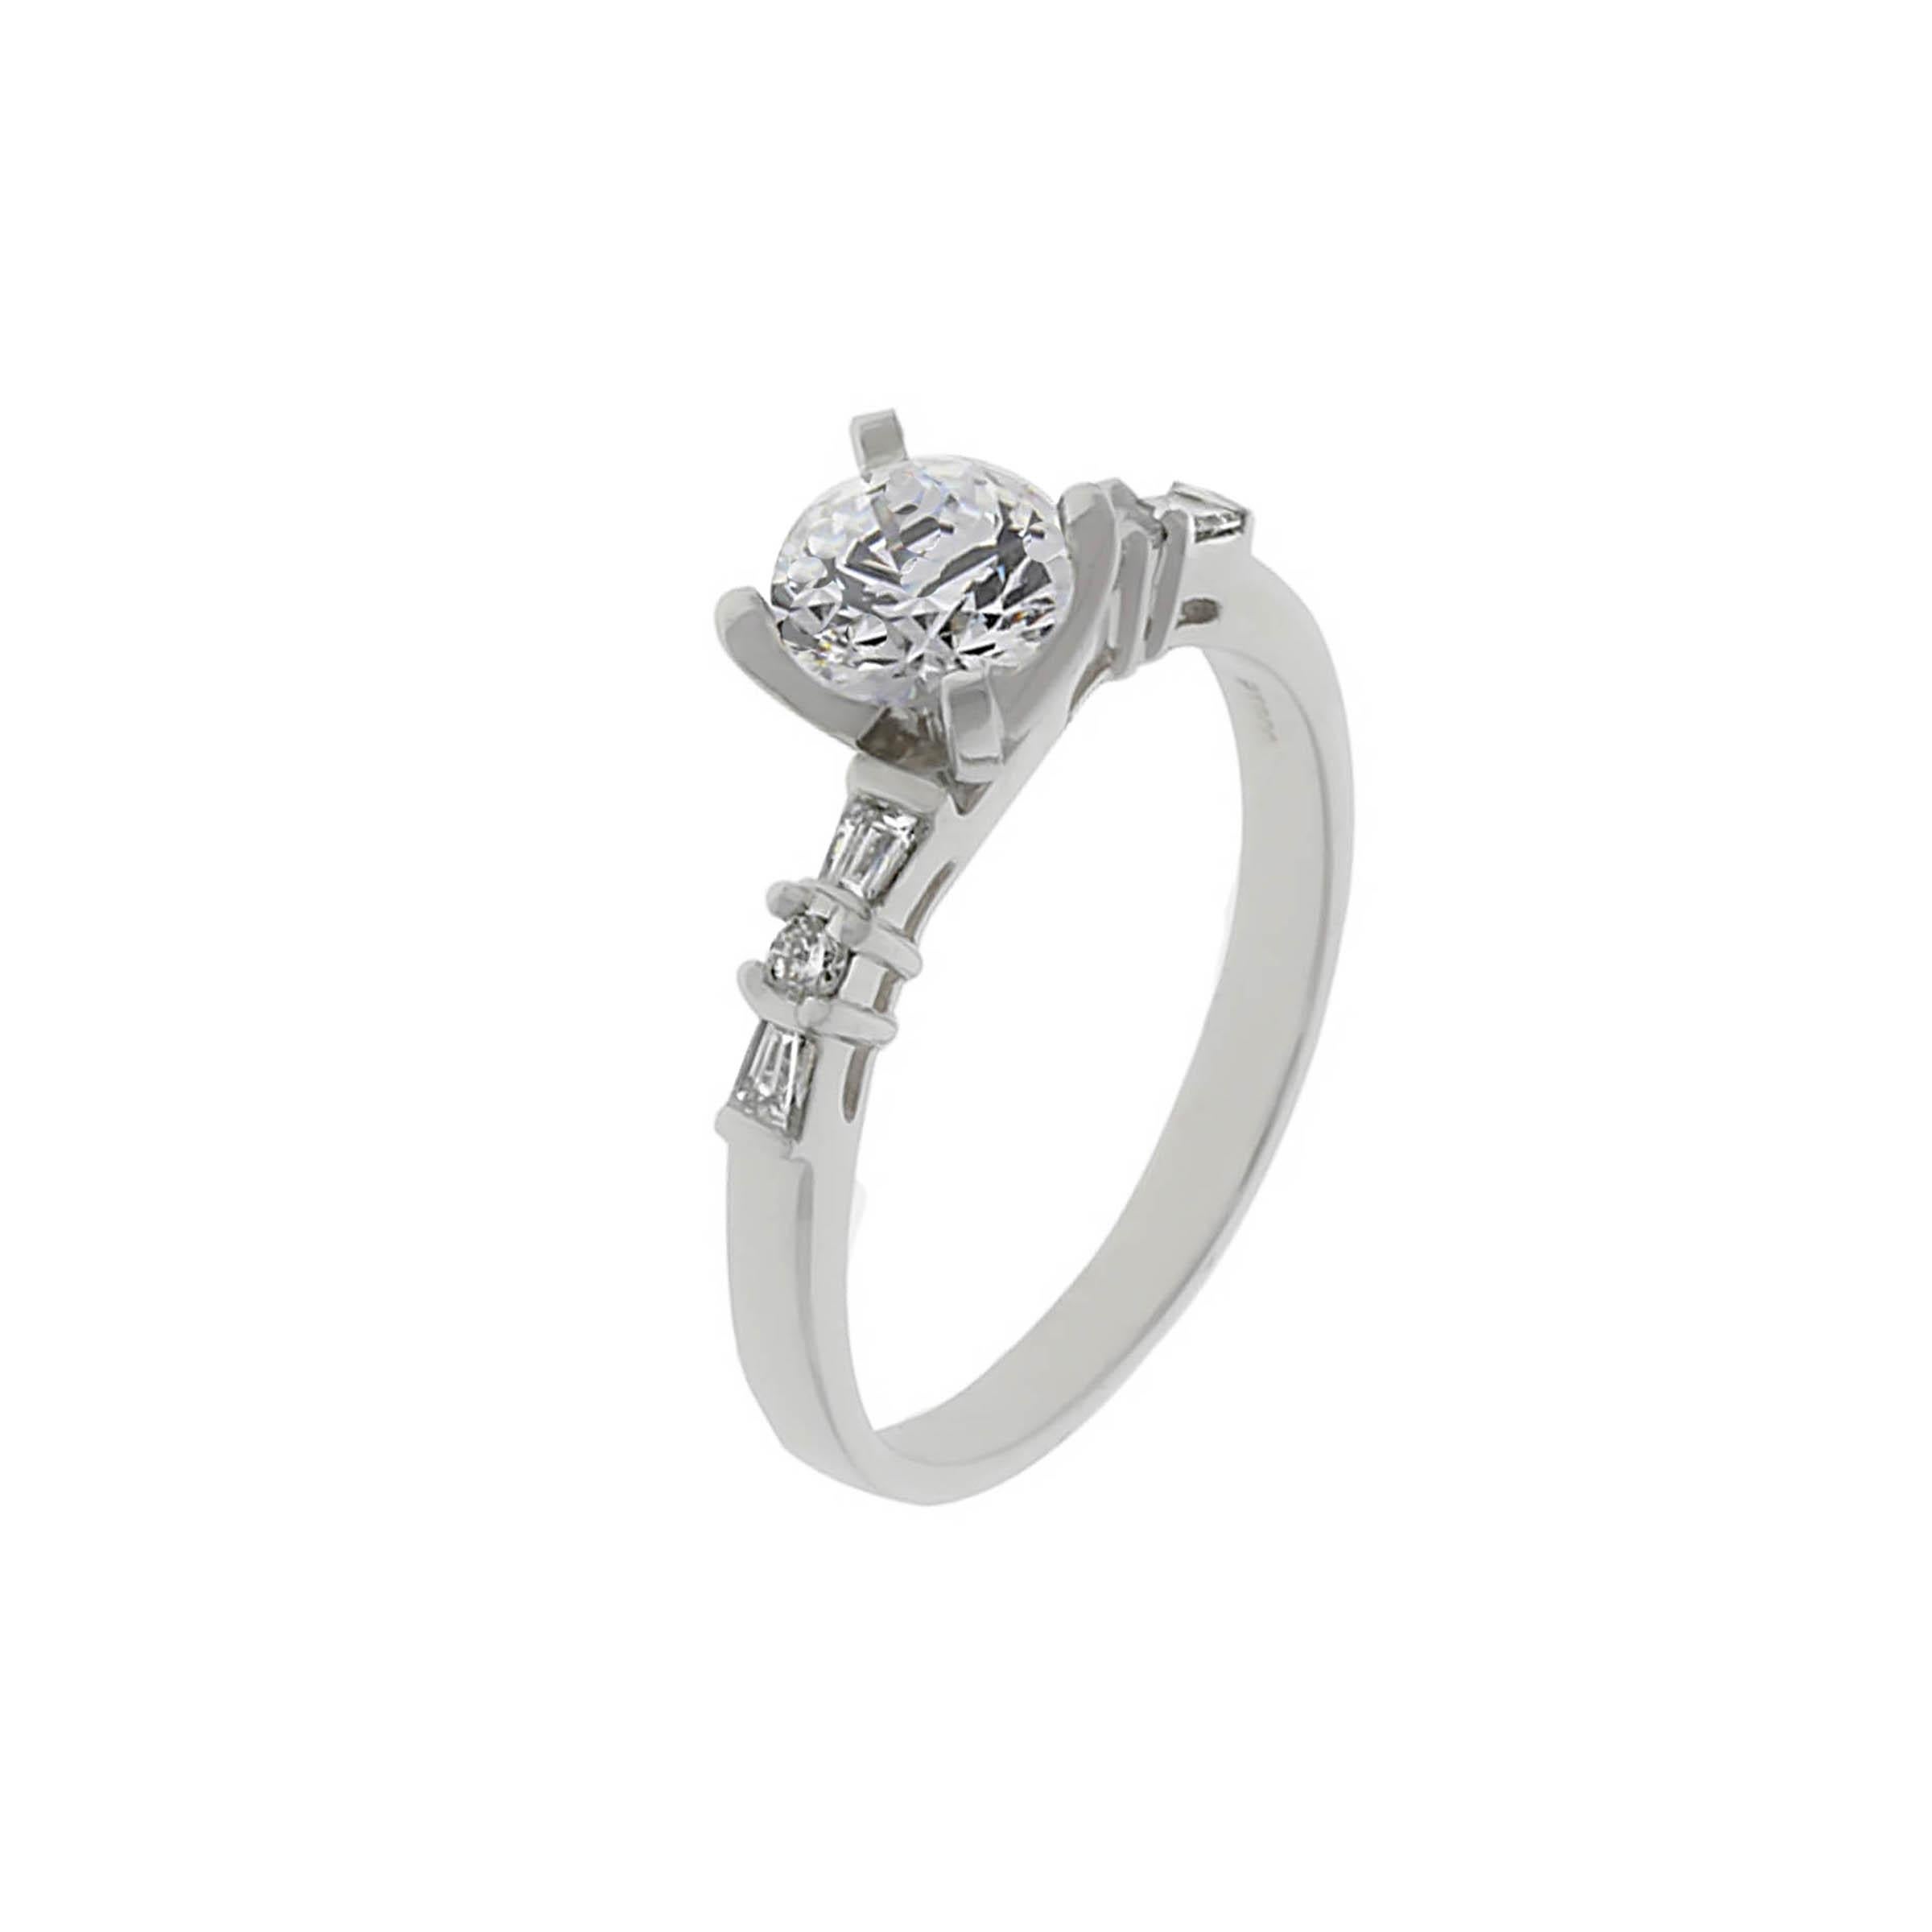 Platinum ring containing one round brilliant cut diamond weighing 1.01 carats, G color, SI2 clarity. The mounting contains 4 baguettes and 2 round diamonds weighing combined 0.16 carat.
The center diamond is GIA certified.
Ring can be sized.